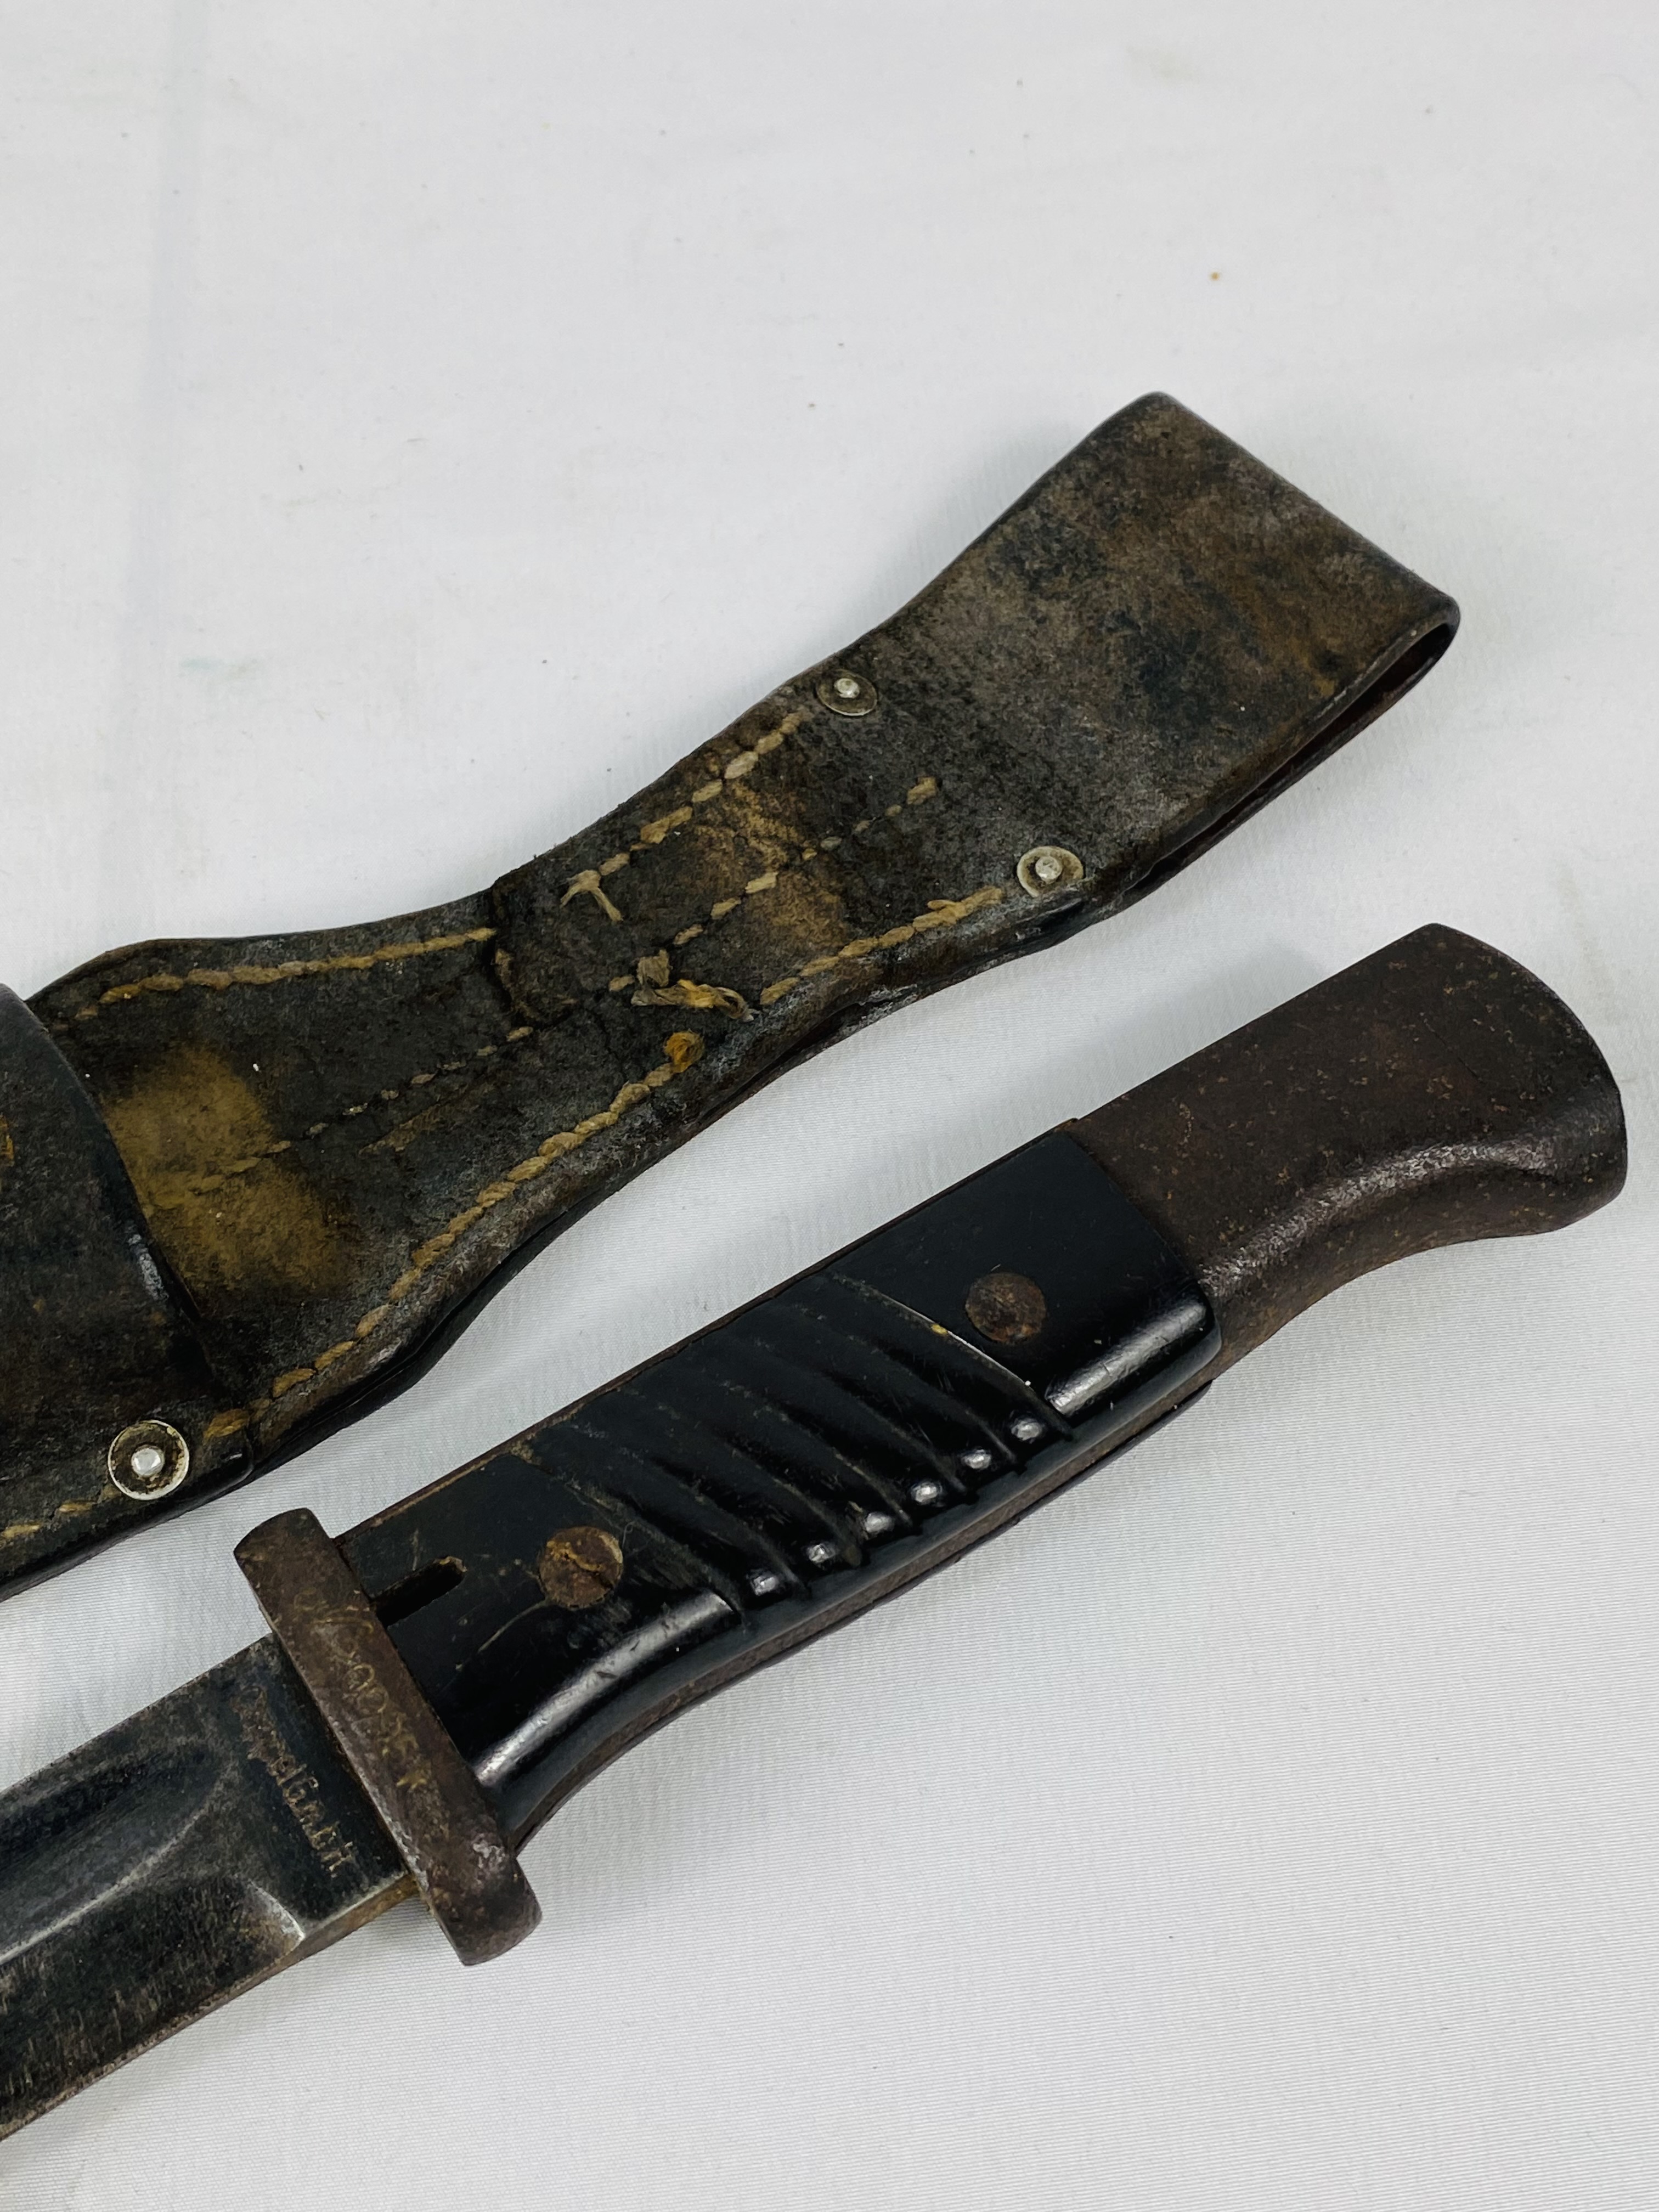 World War II bayonet written to blade Coppell G.m.b.H N20995K in leather scabbard. - Image 3 of 4